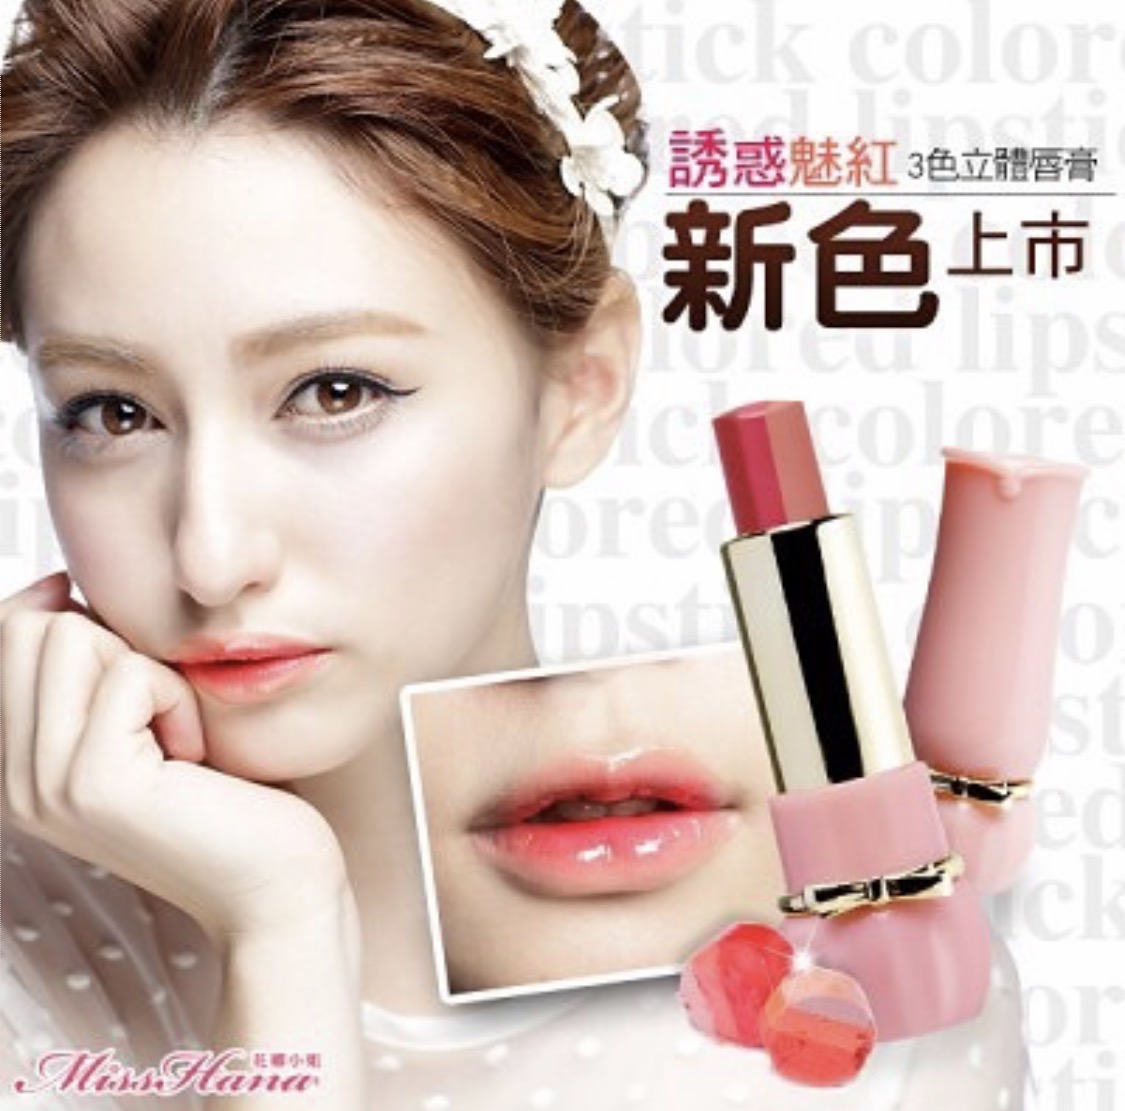 The Reasons Why Beauty Market In Taiwan Is In A Regulatory Tight-Spot